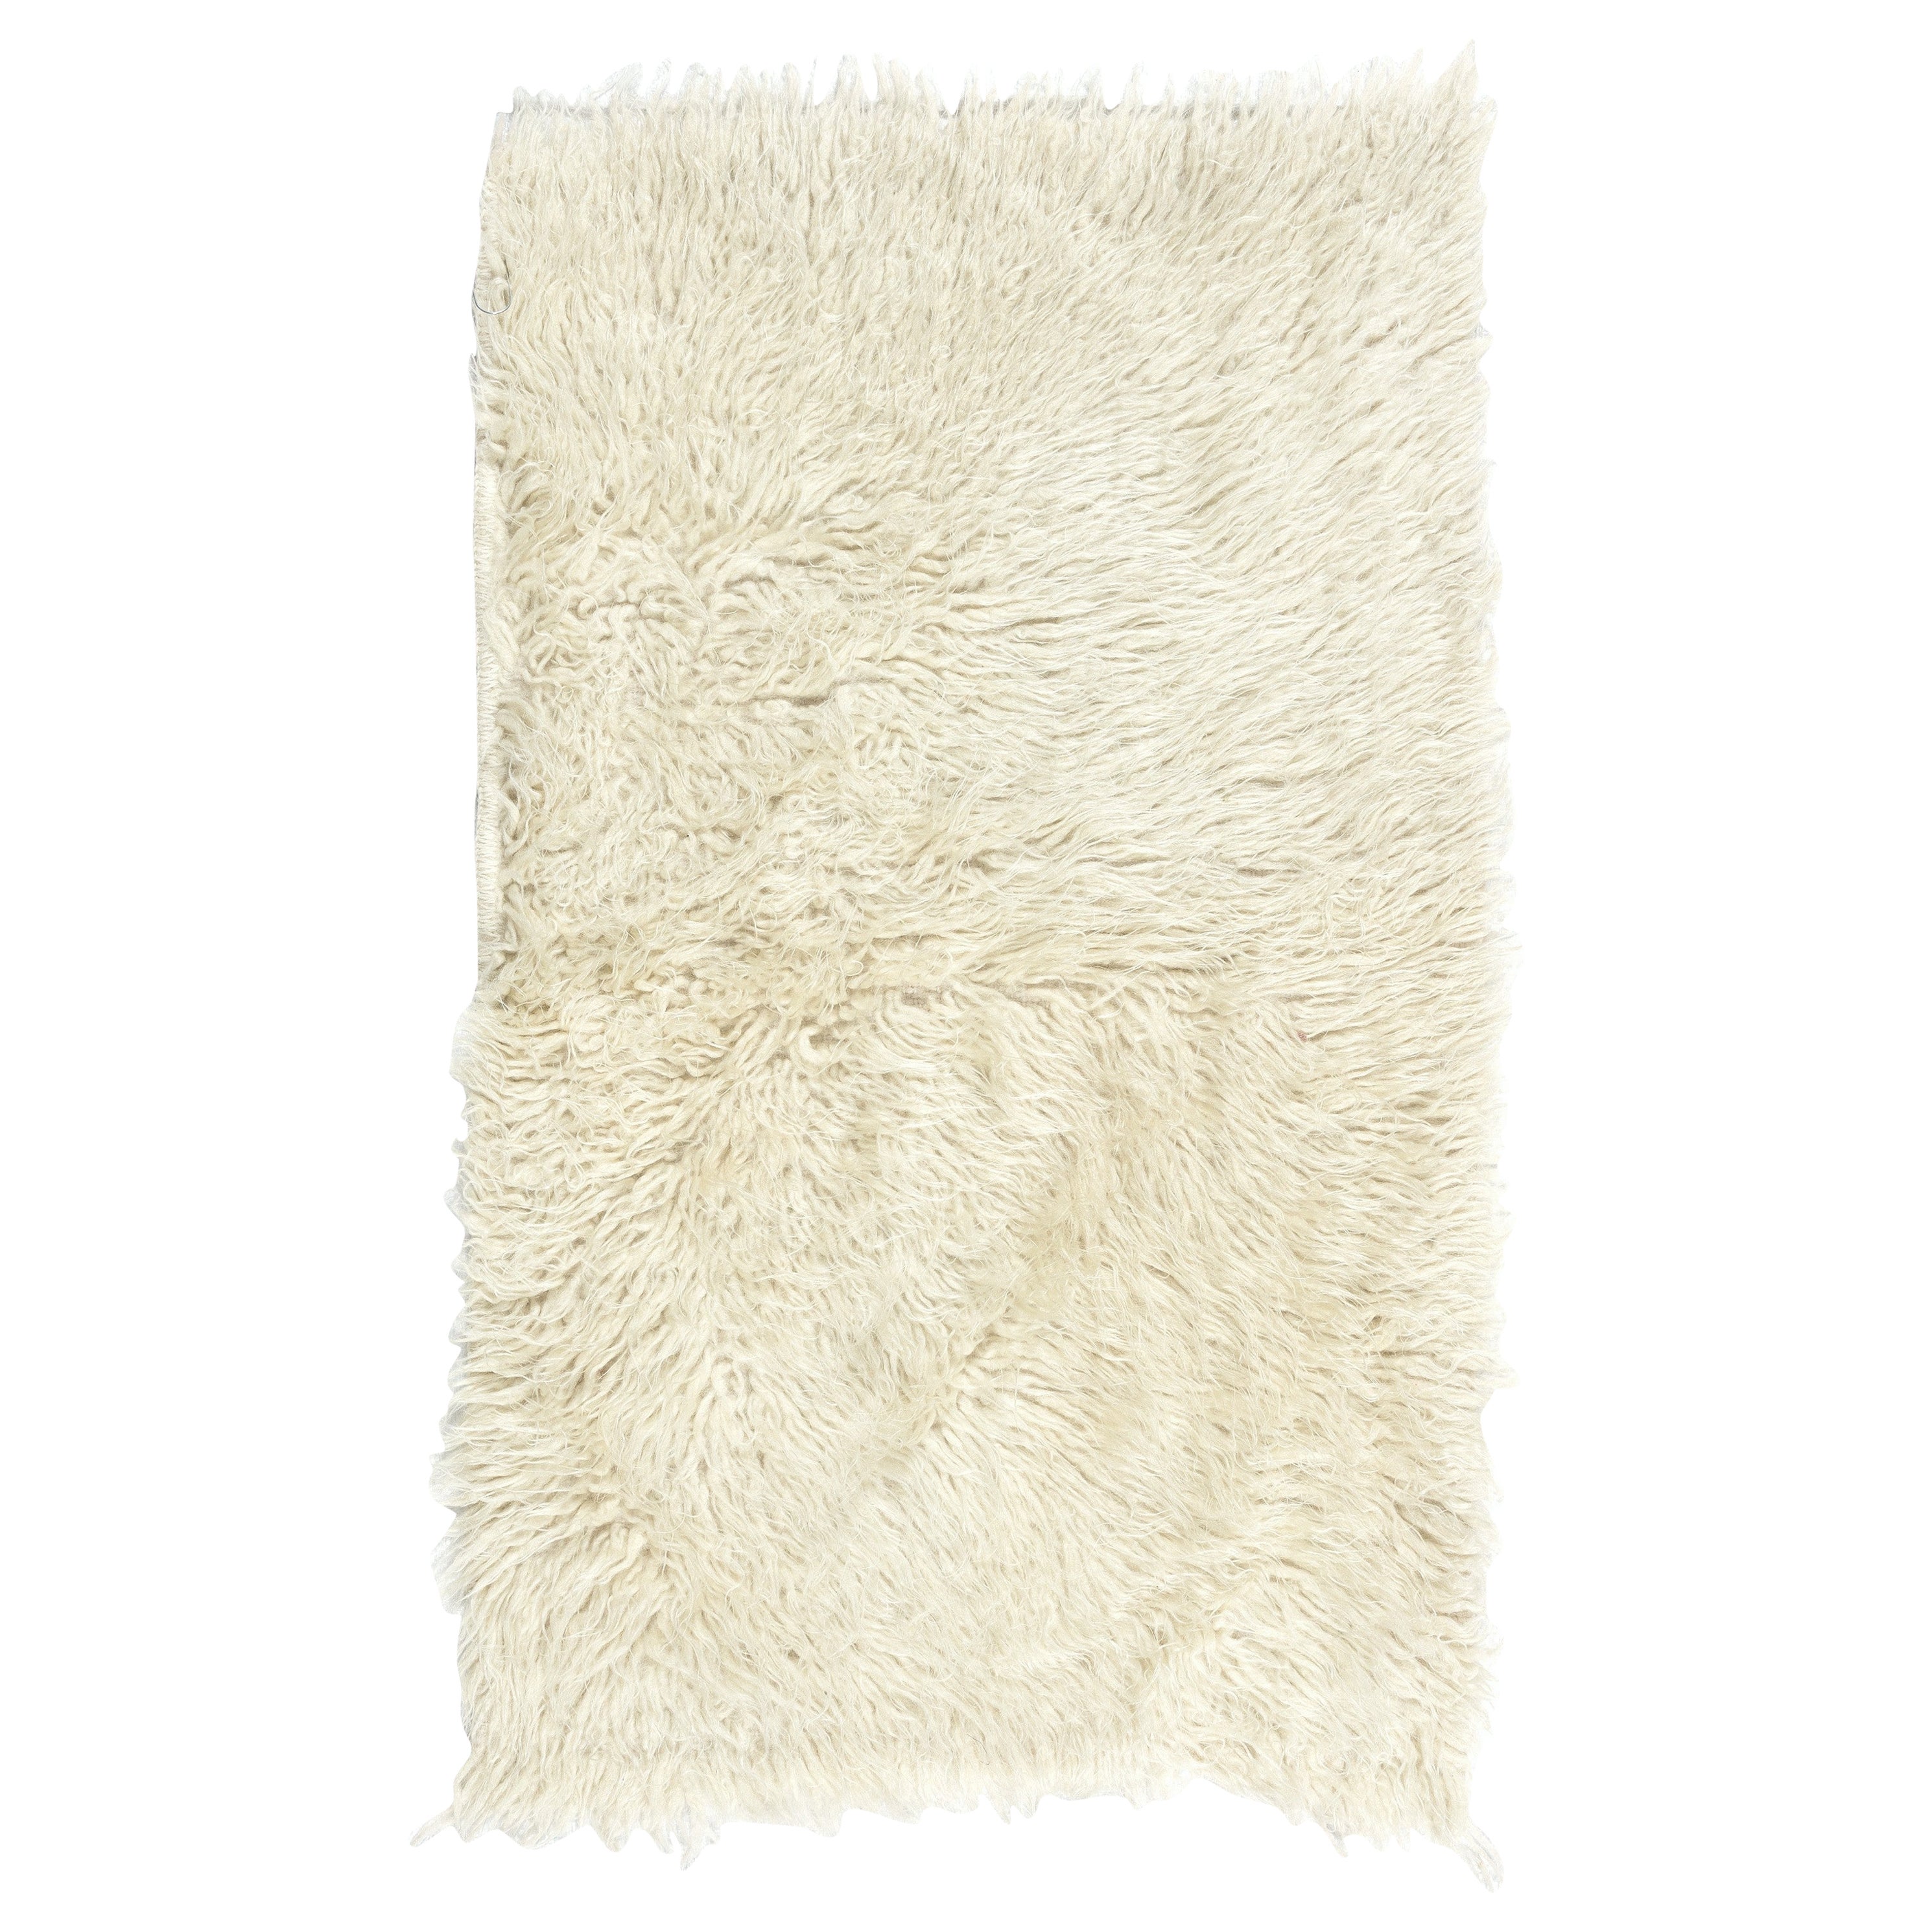 21"x35" Vintage Handmade Shaggy Accent Rug Made of Natural Mohair Wool For Sale